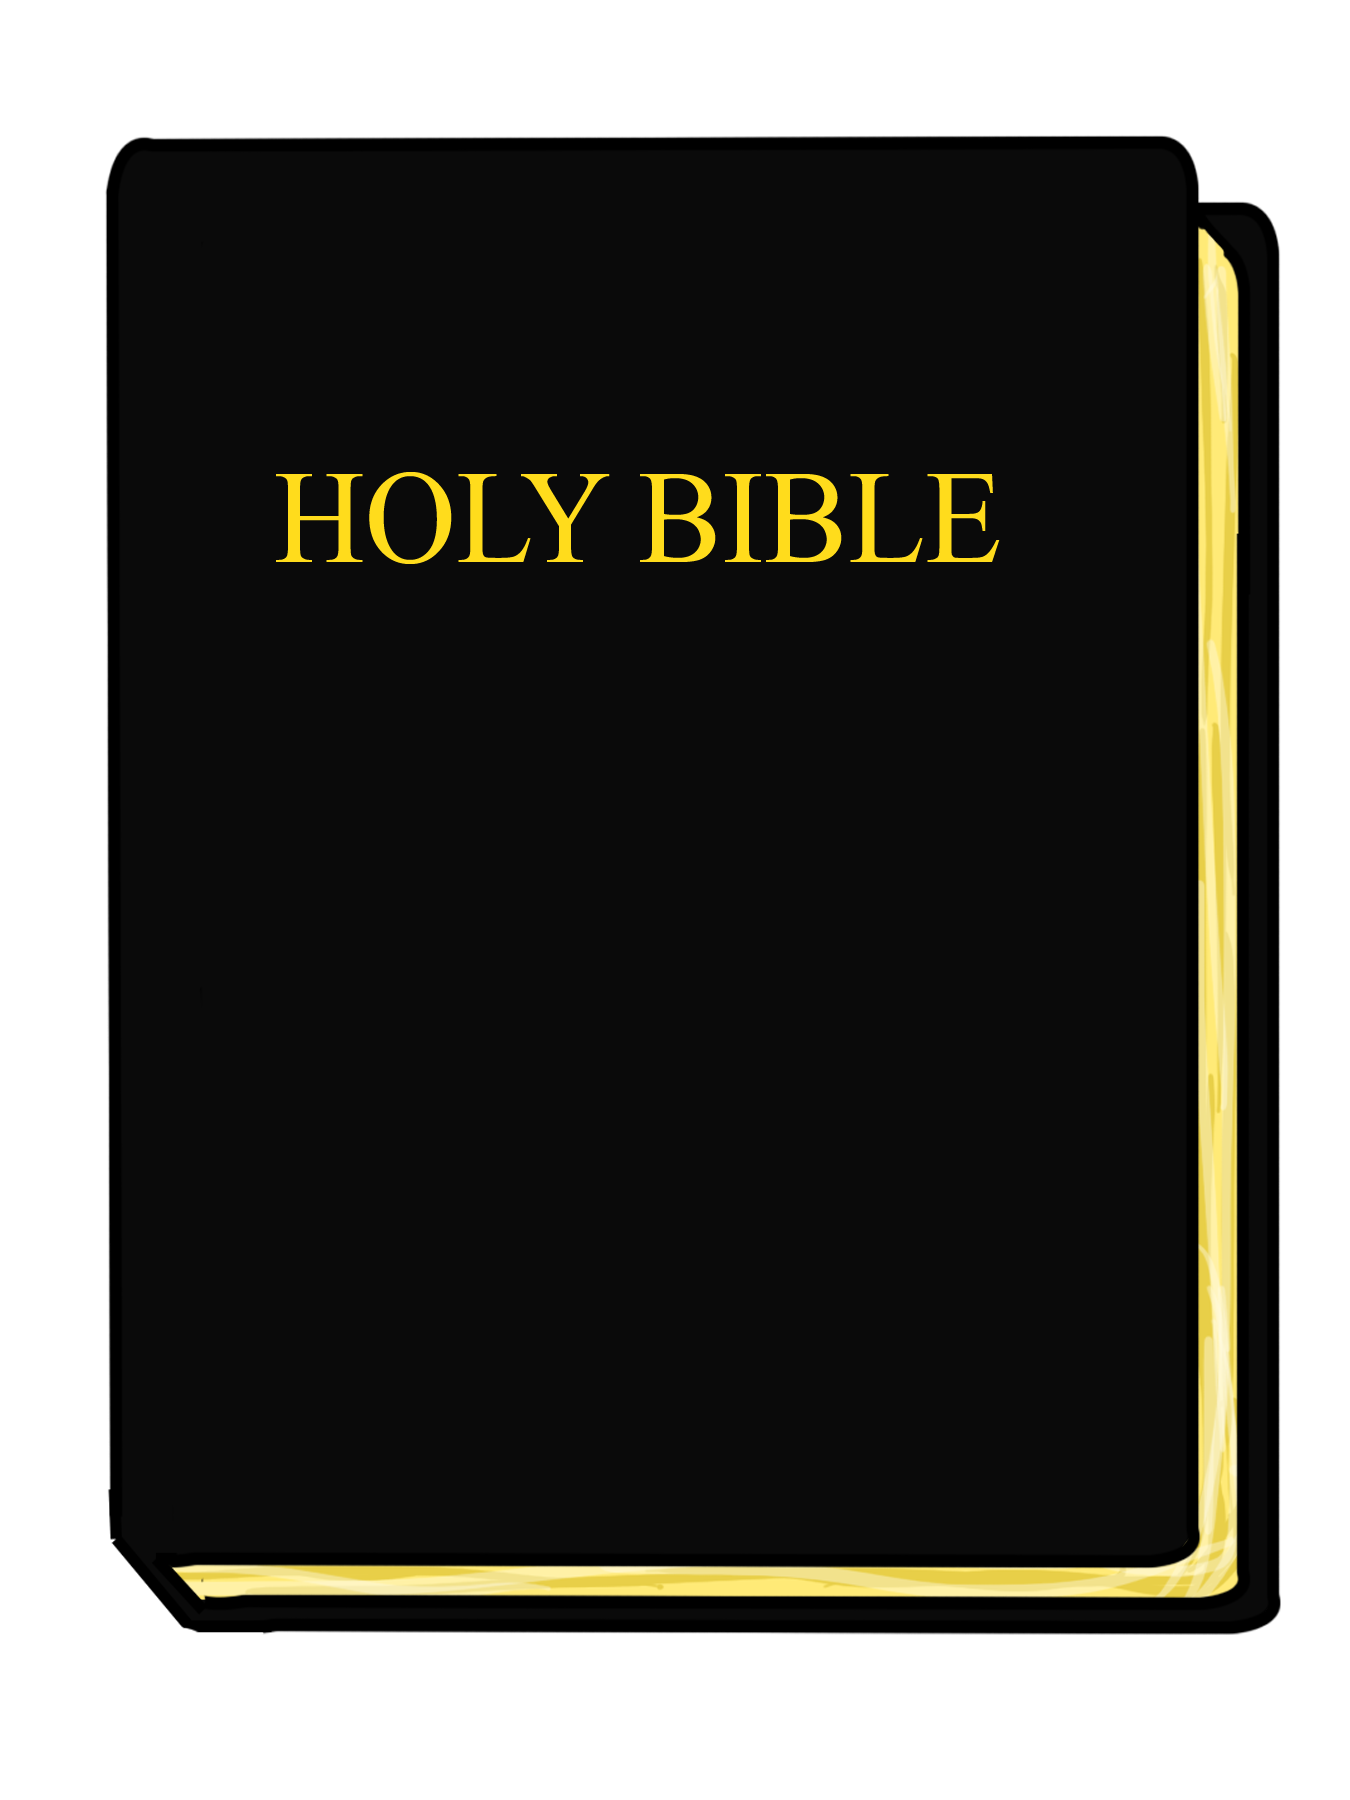 Bible cliparts